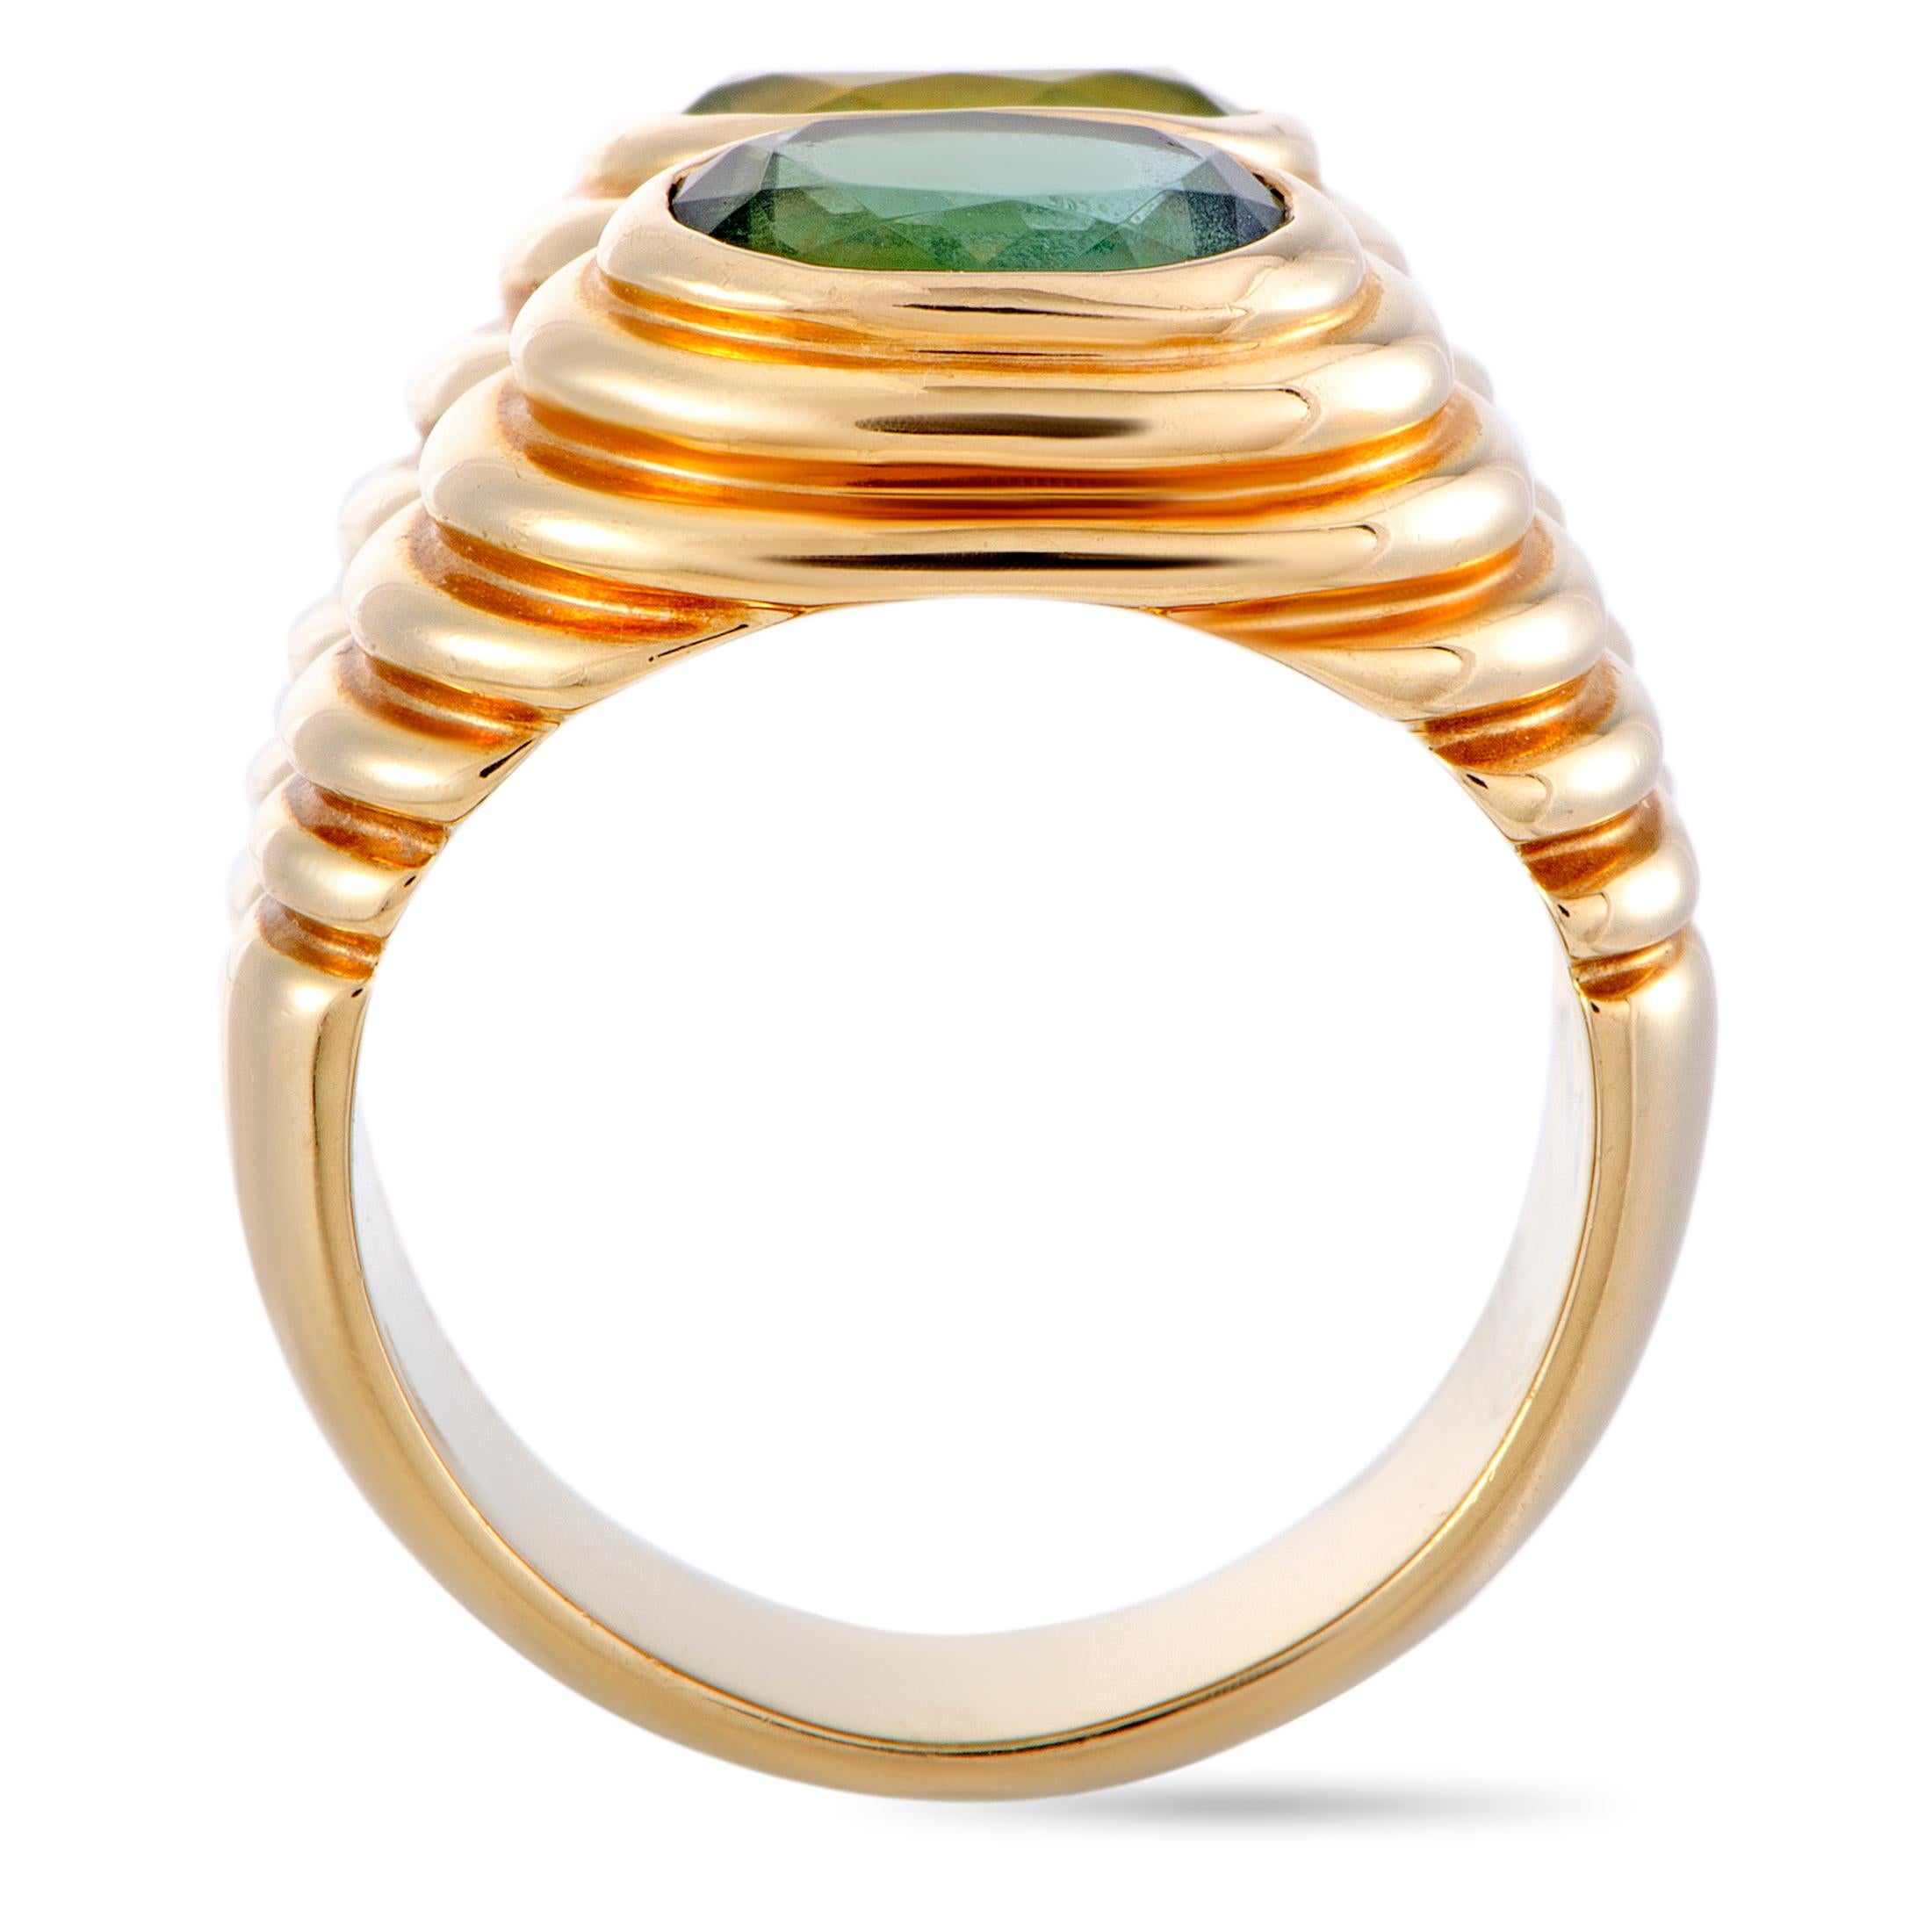 The Bvlgari “Doppio” ring is crafted from 18K yellow gold and set with a peridot and a tourmaline. The ring weighs 15.3 grams, boasting band thickness of 5 mm and top height of 5 mm, while top dimensions measure 15 by 10 mm.

This jewelry piece is